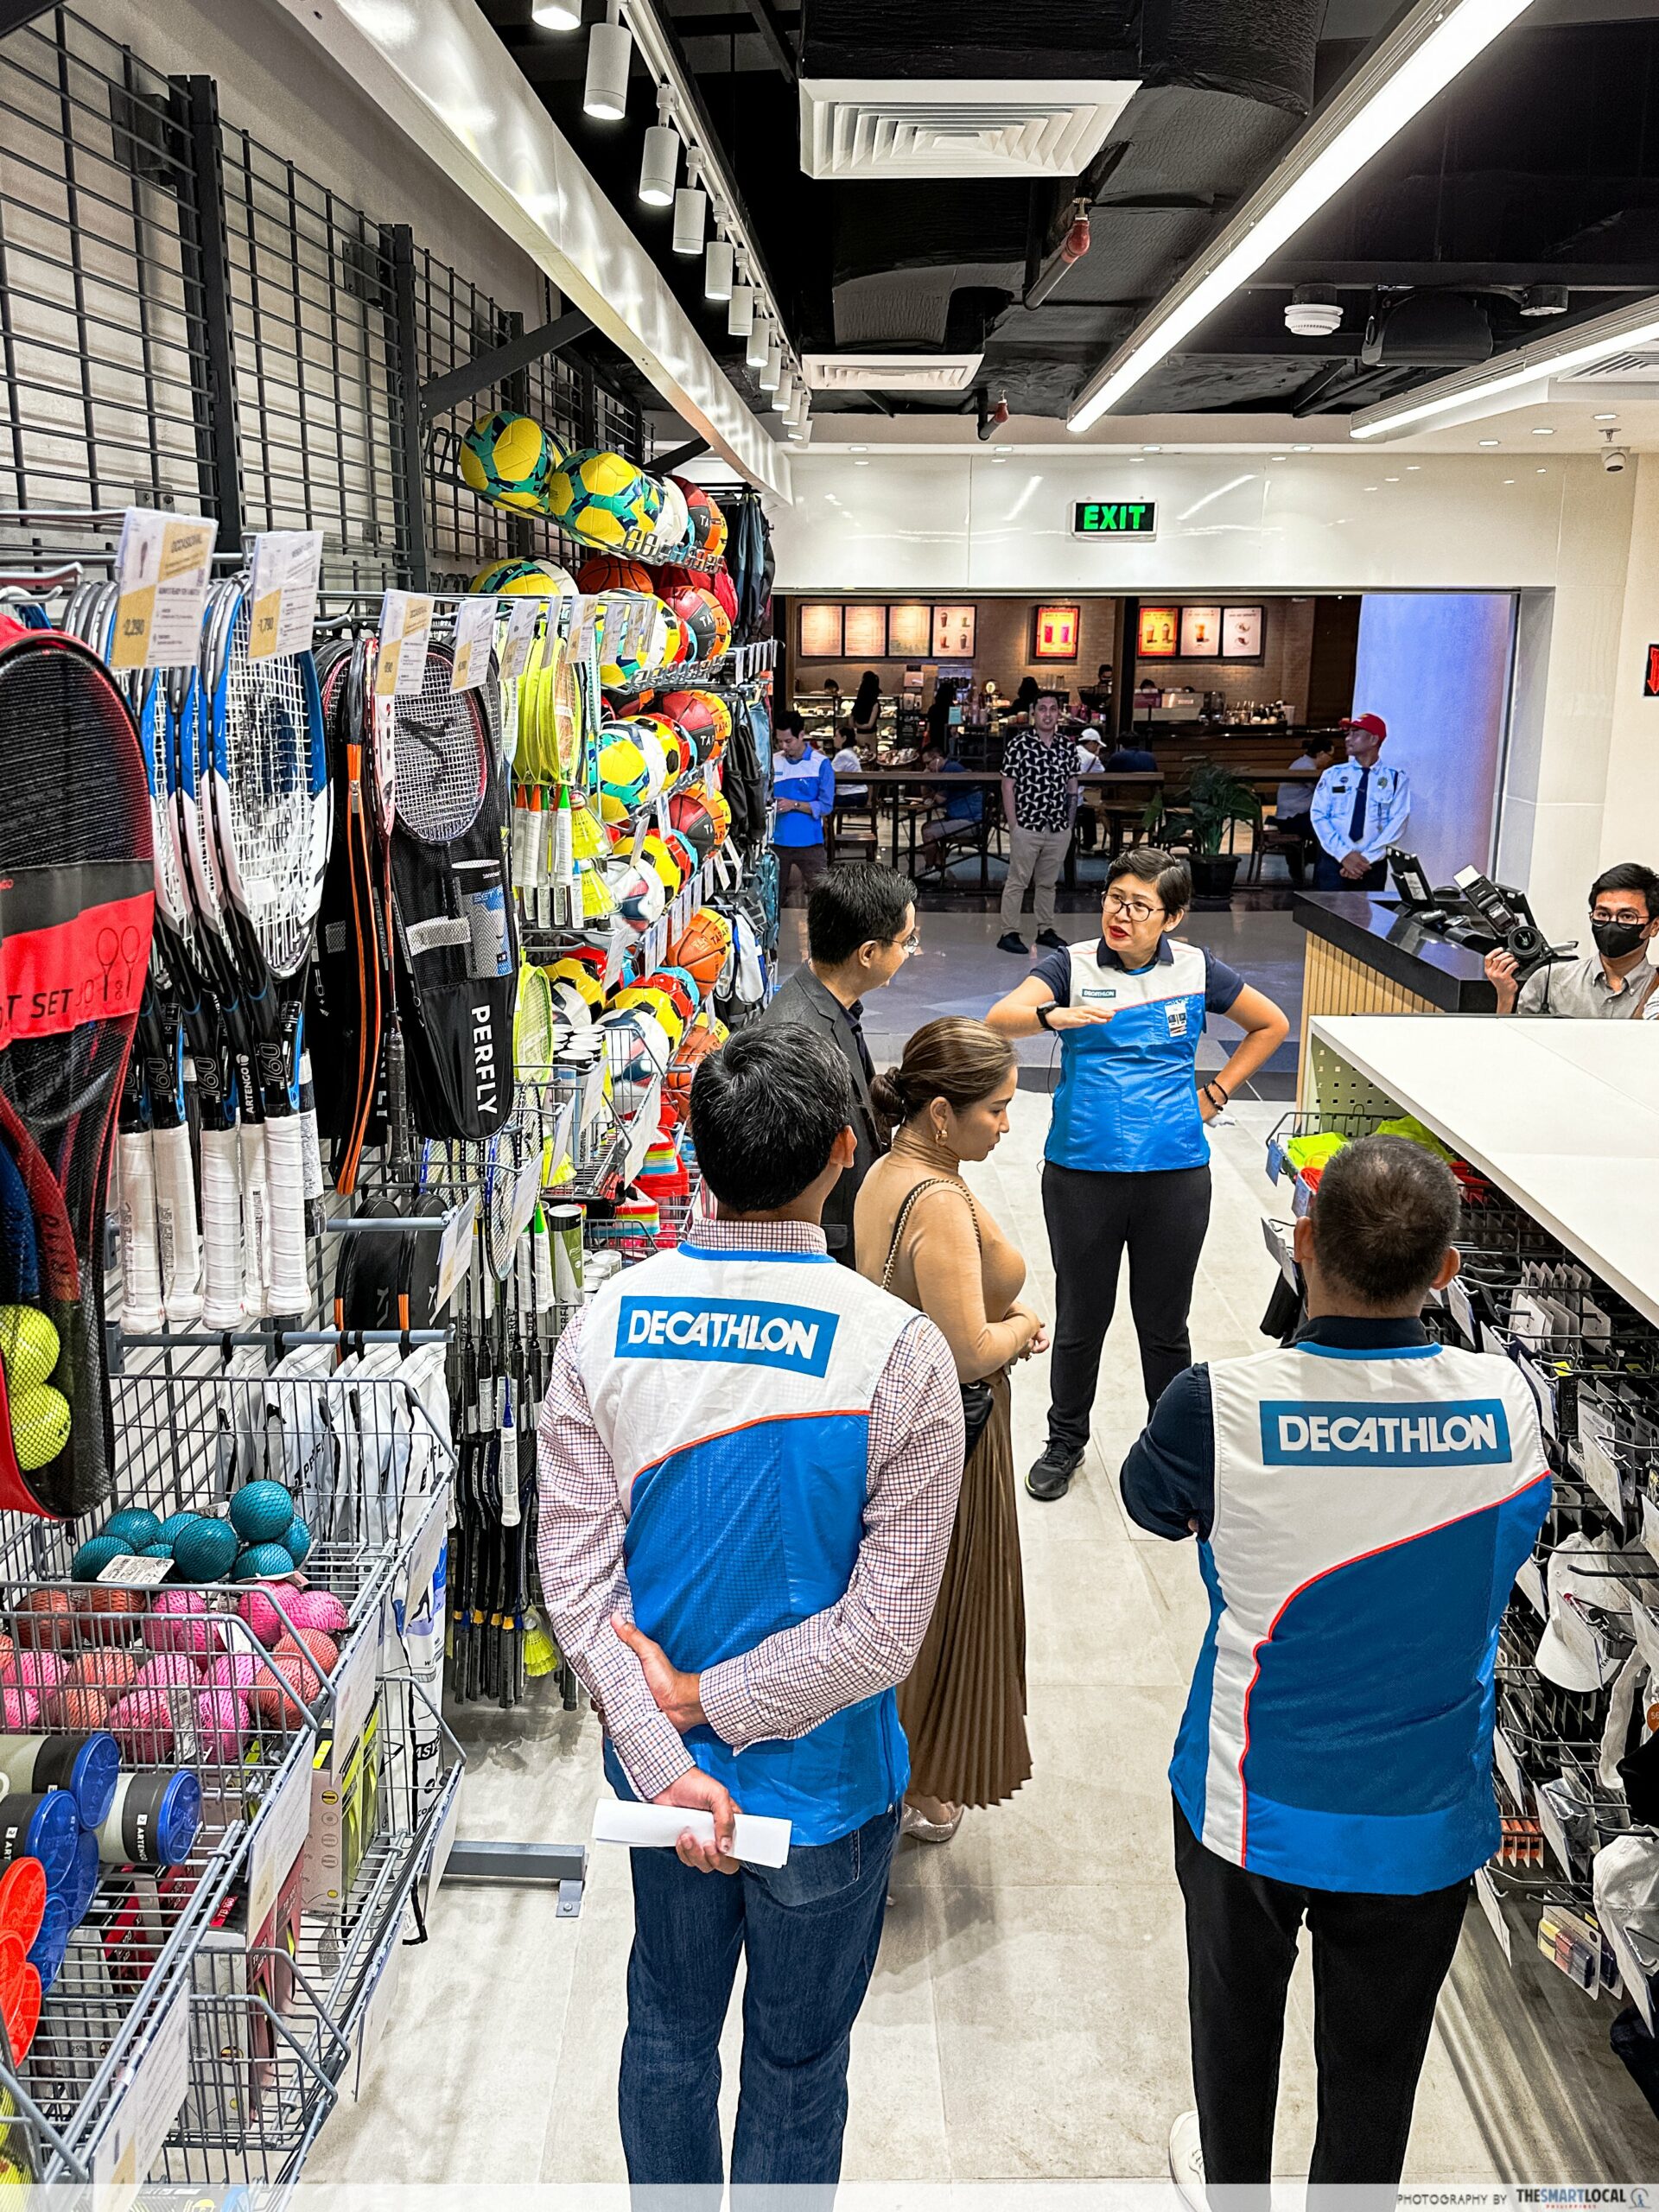 Decathlon Ermita Connect - great quick stop option for everyone